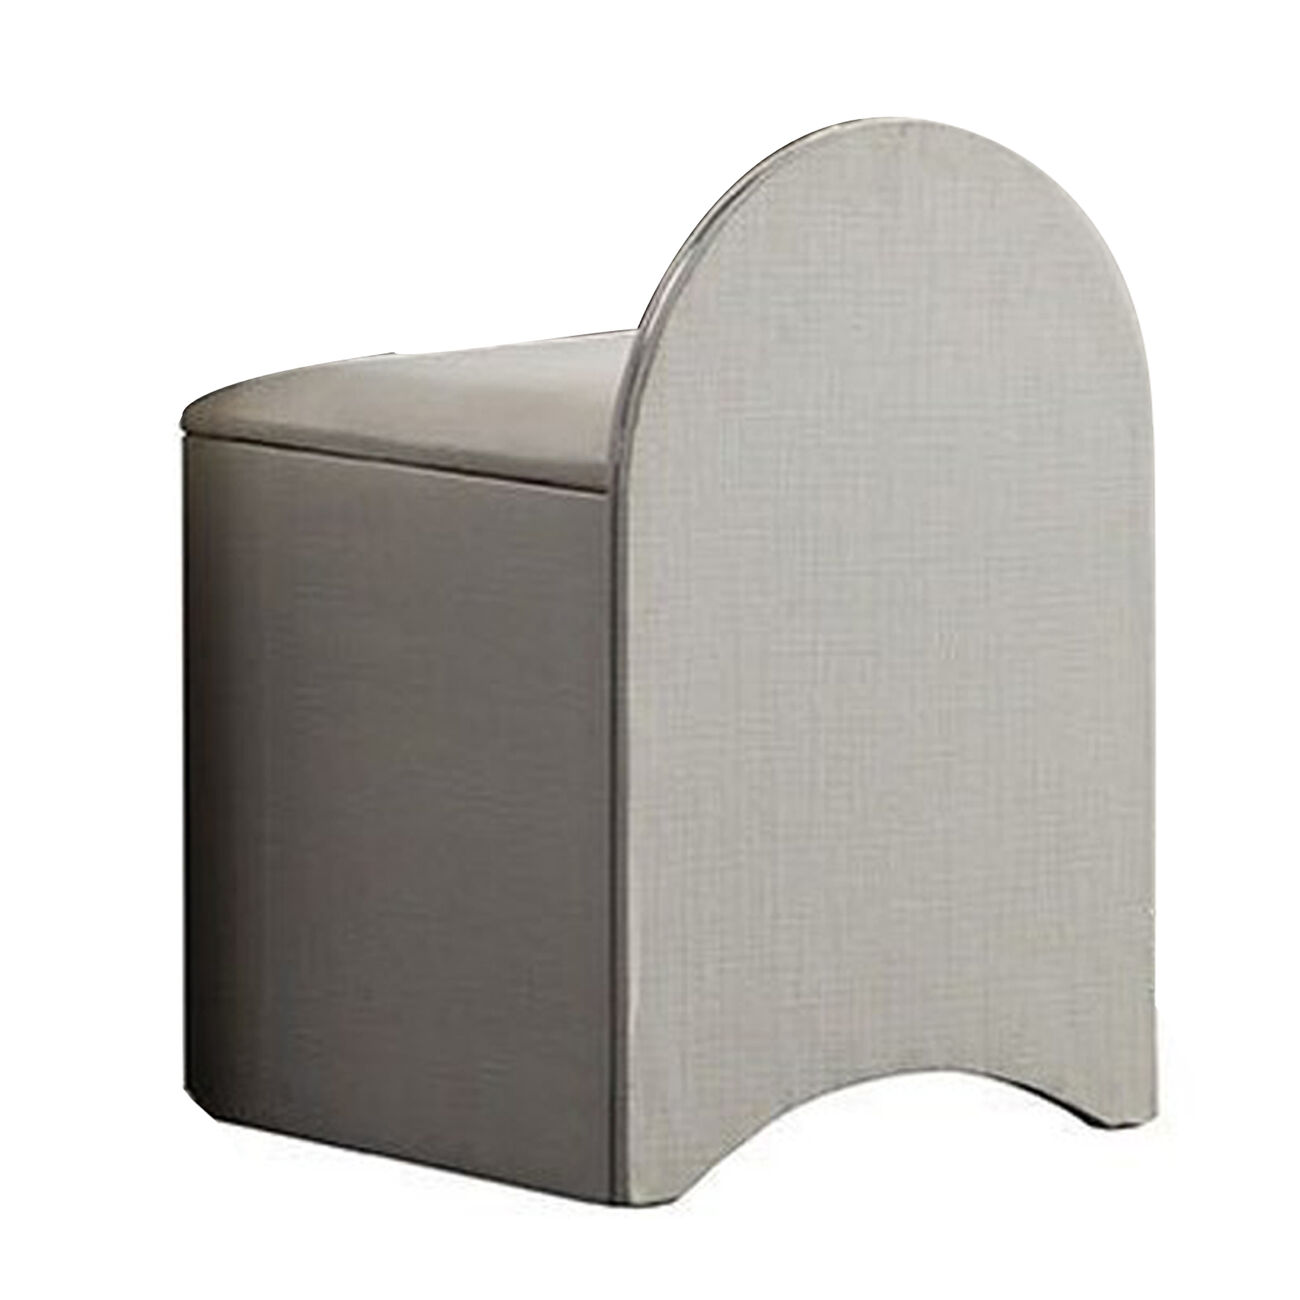 3 Drawer Fabric Upholstered Wooden Vanity Desk with Padded Stool, Gray